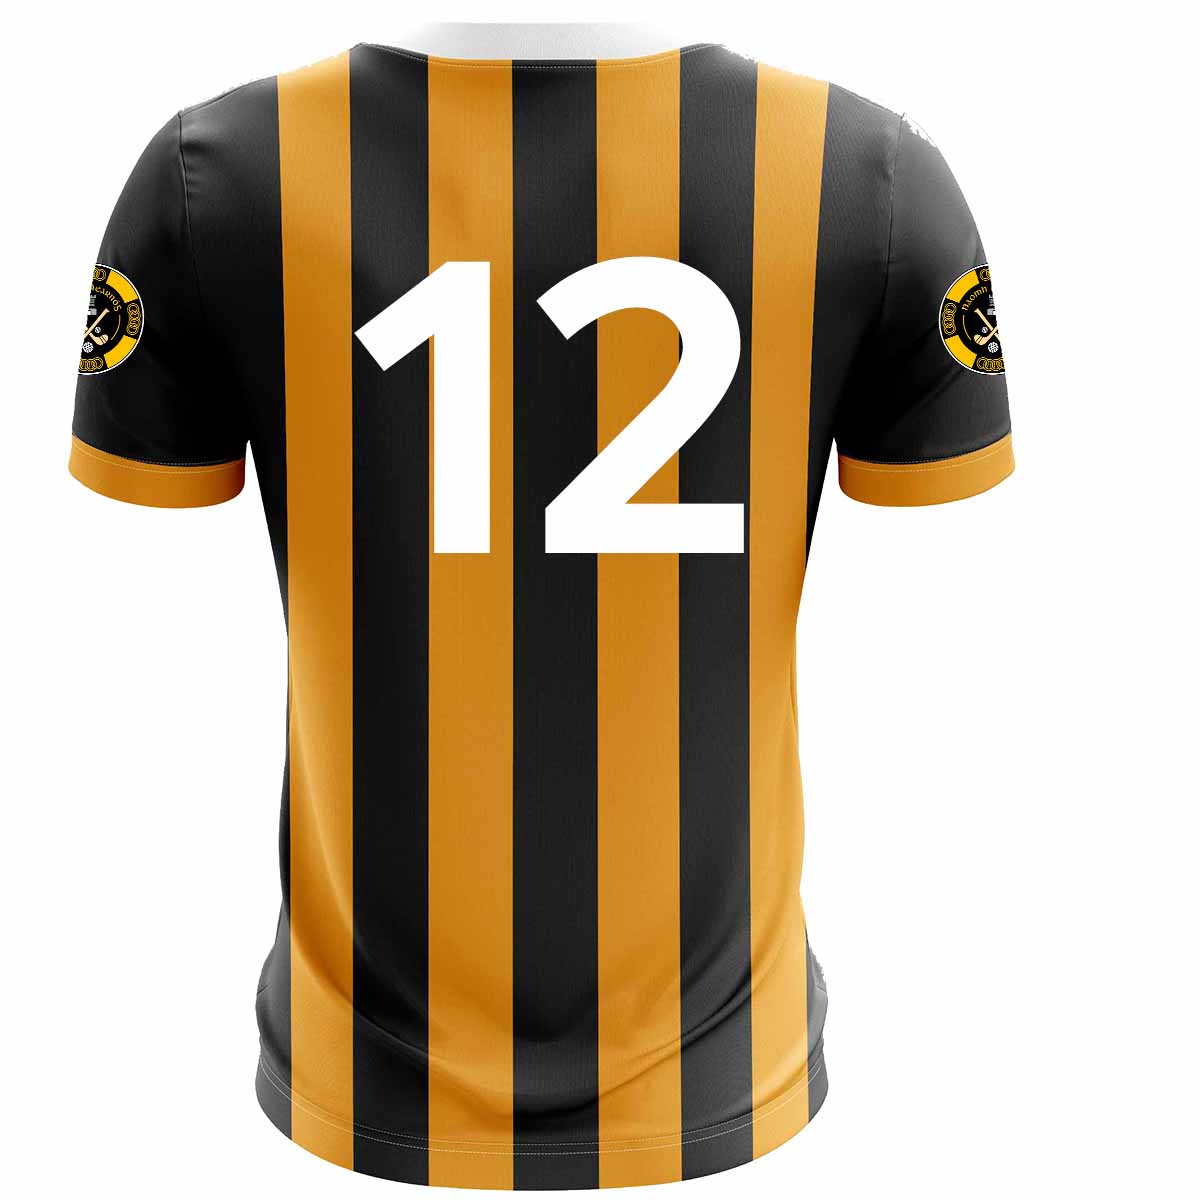 Mc Keever Naomh Mearnog CLG Numbered Playing Jersey - Adult - Black/Amber Player Fit